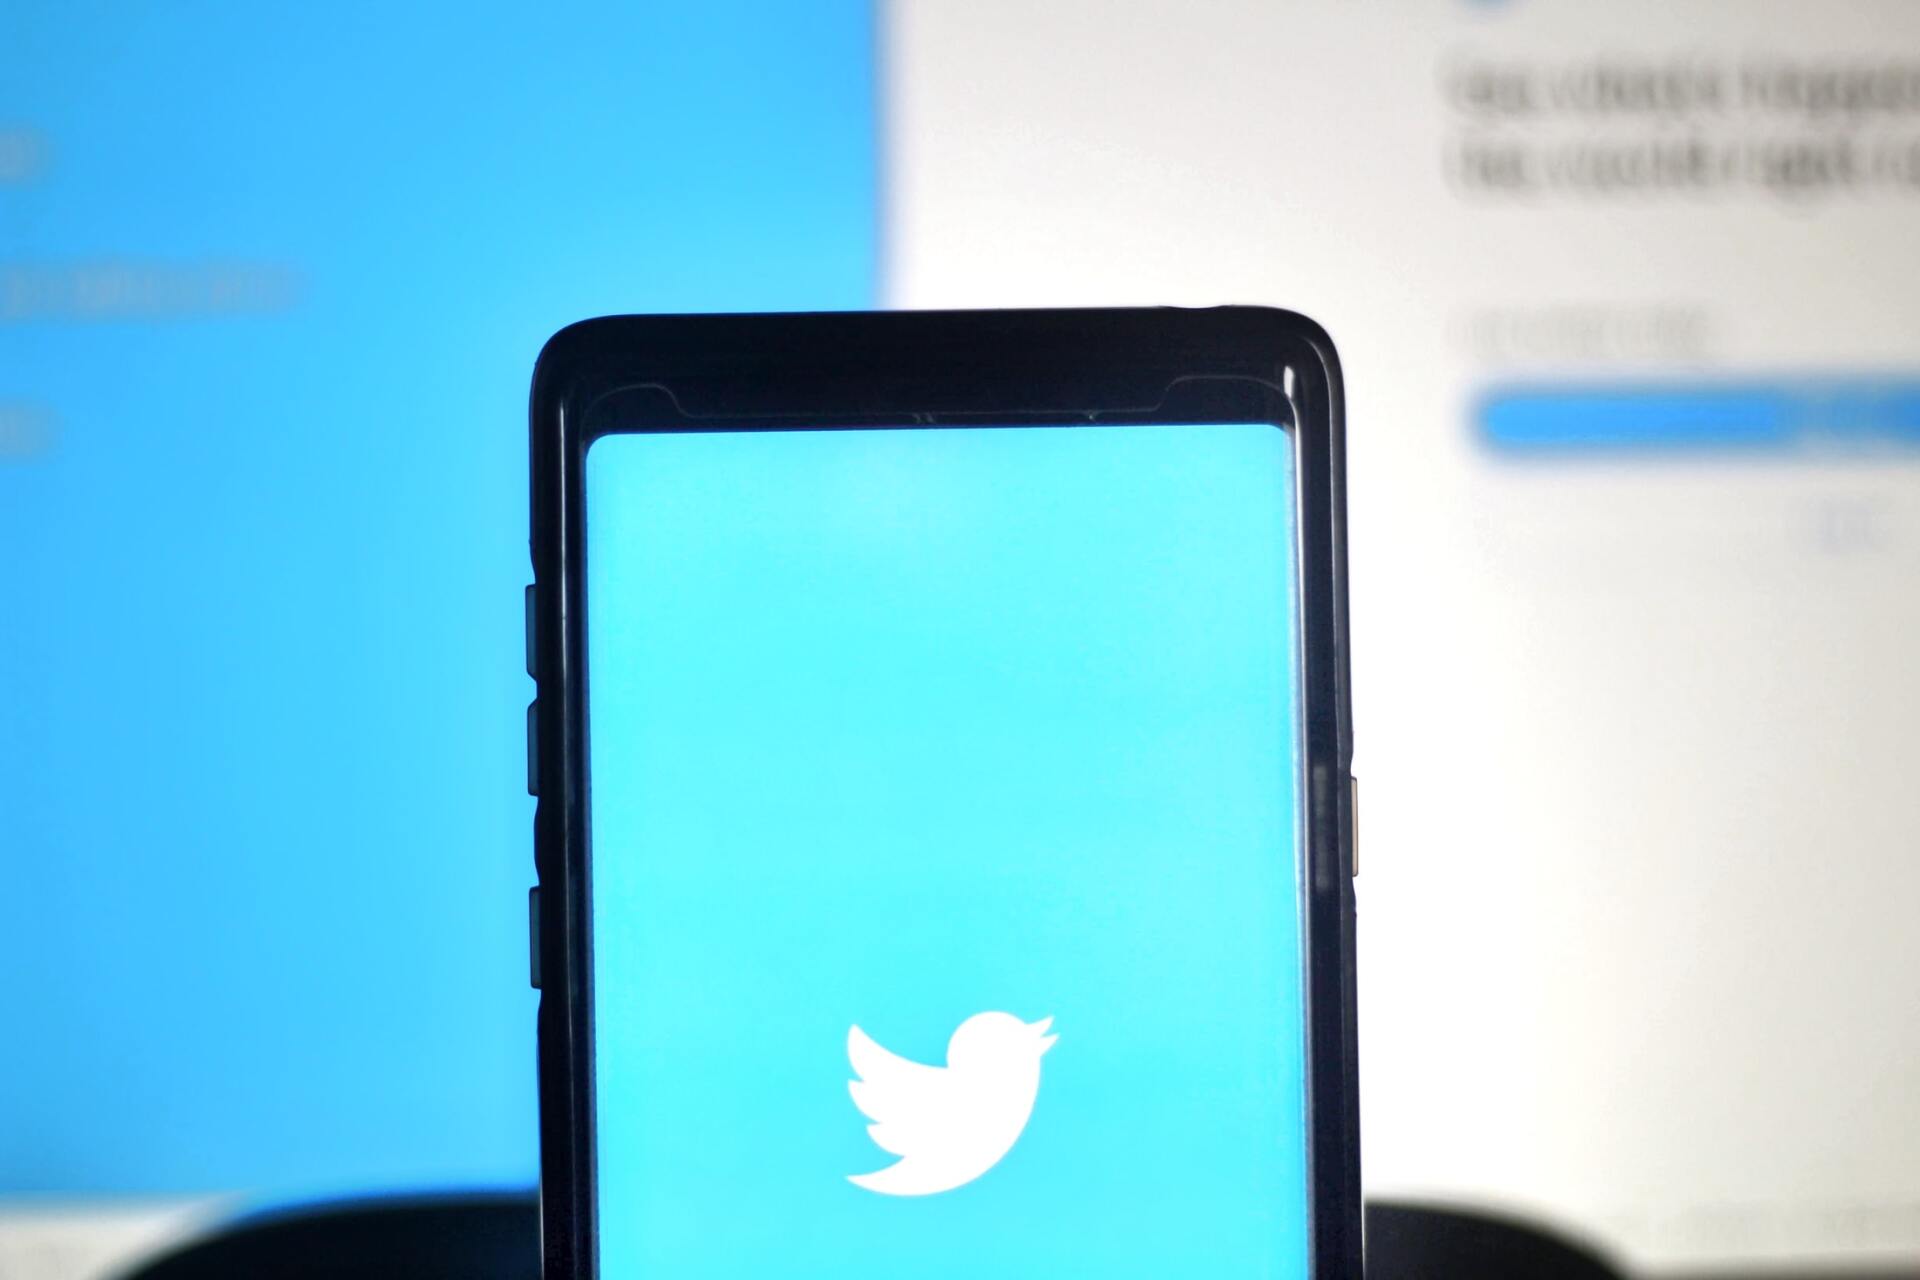 A phone with a twitter logo on the screen